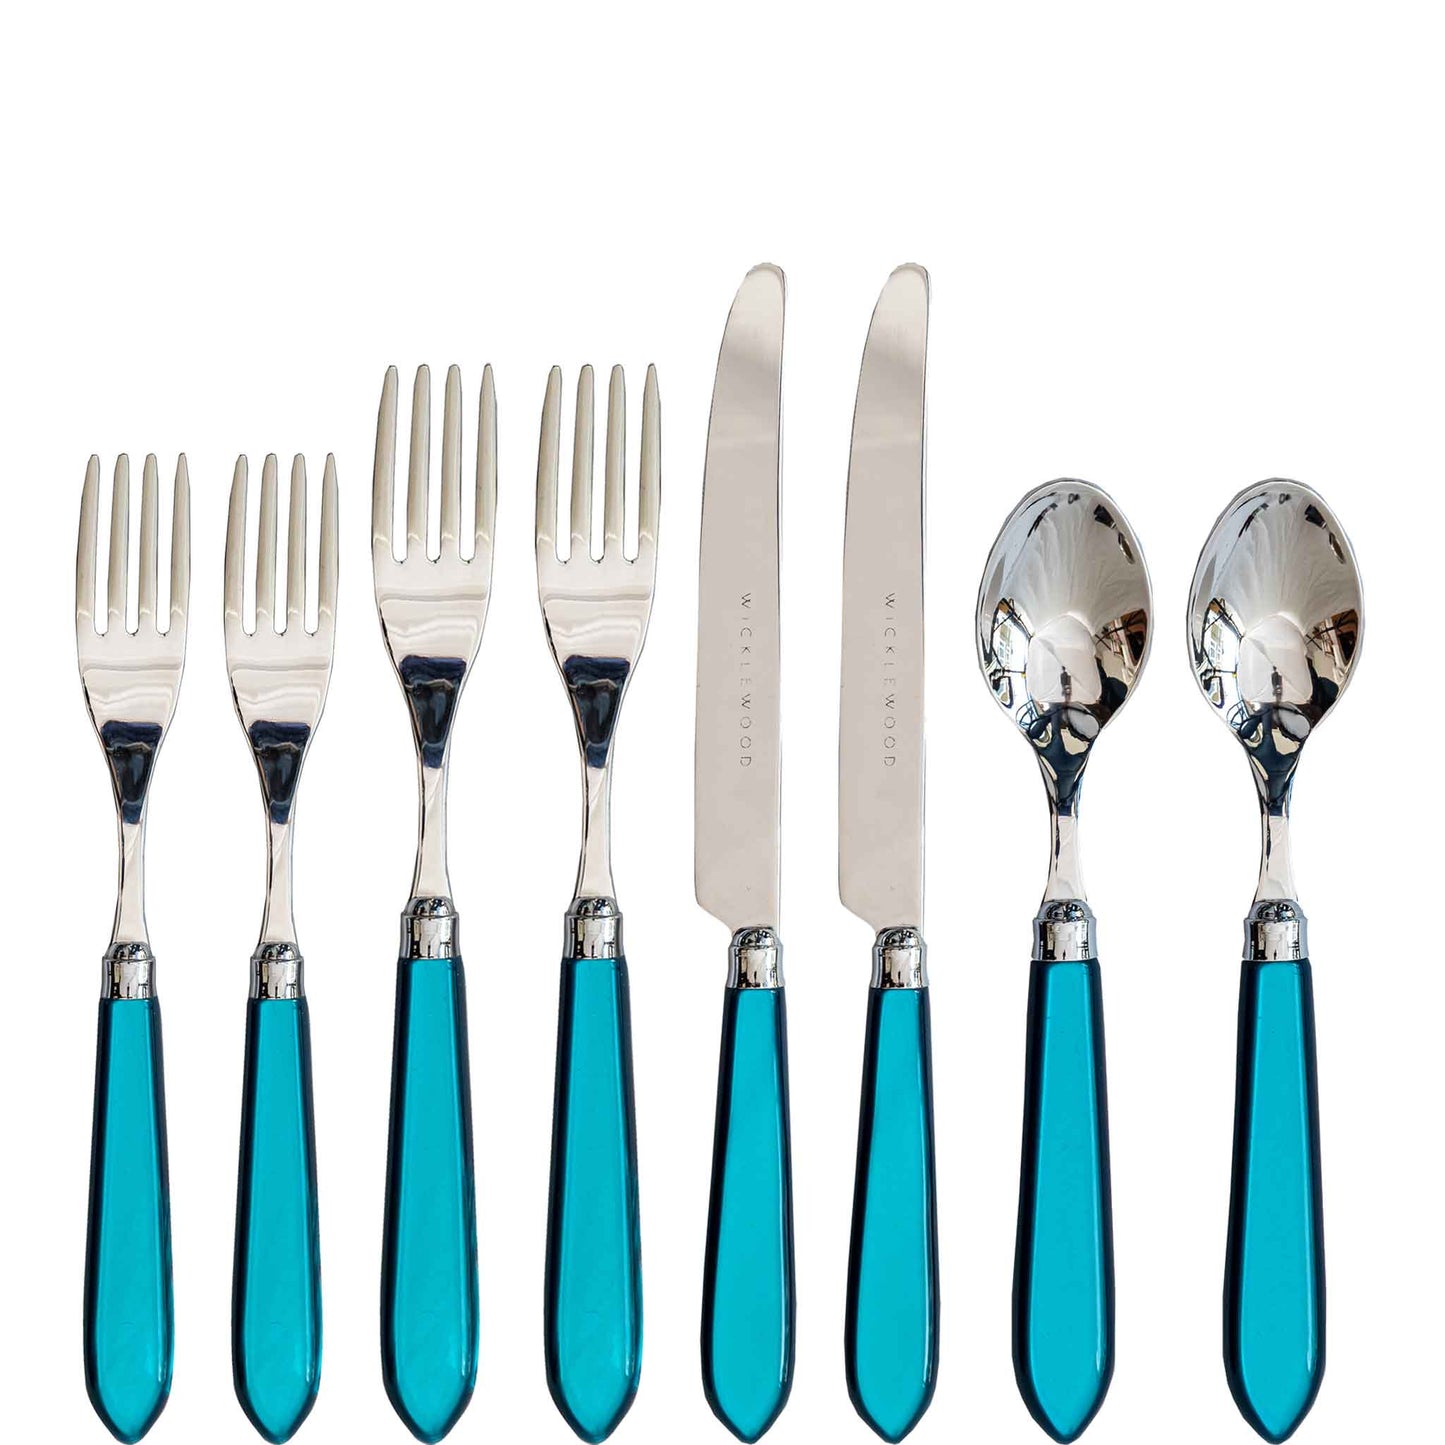 8 Piece Cutlery Set Turquoise